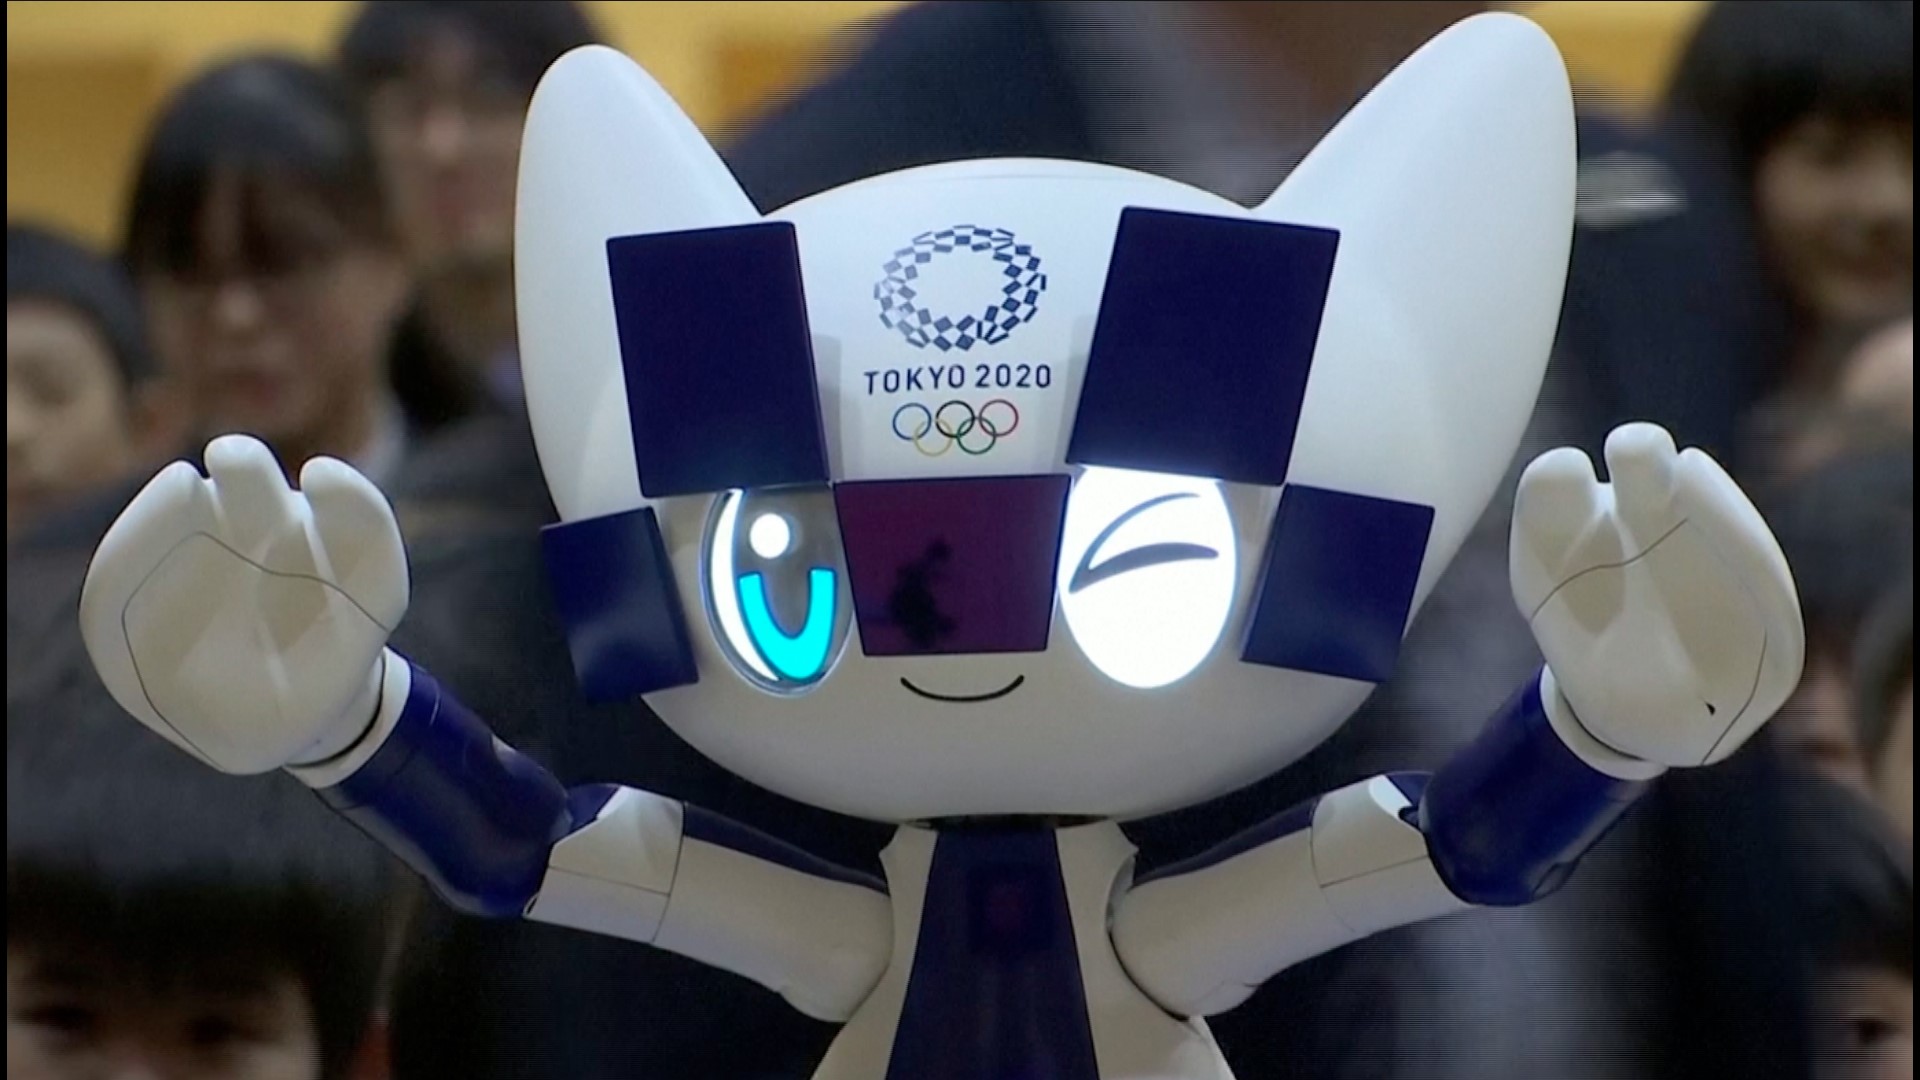 Elementary school students in Tokyo got to meet the official Tokyo 2020 Olympics mascot robots, with officials showing off their various remote control features. Buzz60's Mercer Morrison has the story.